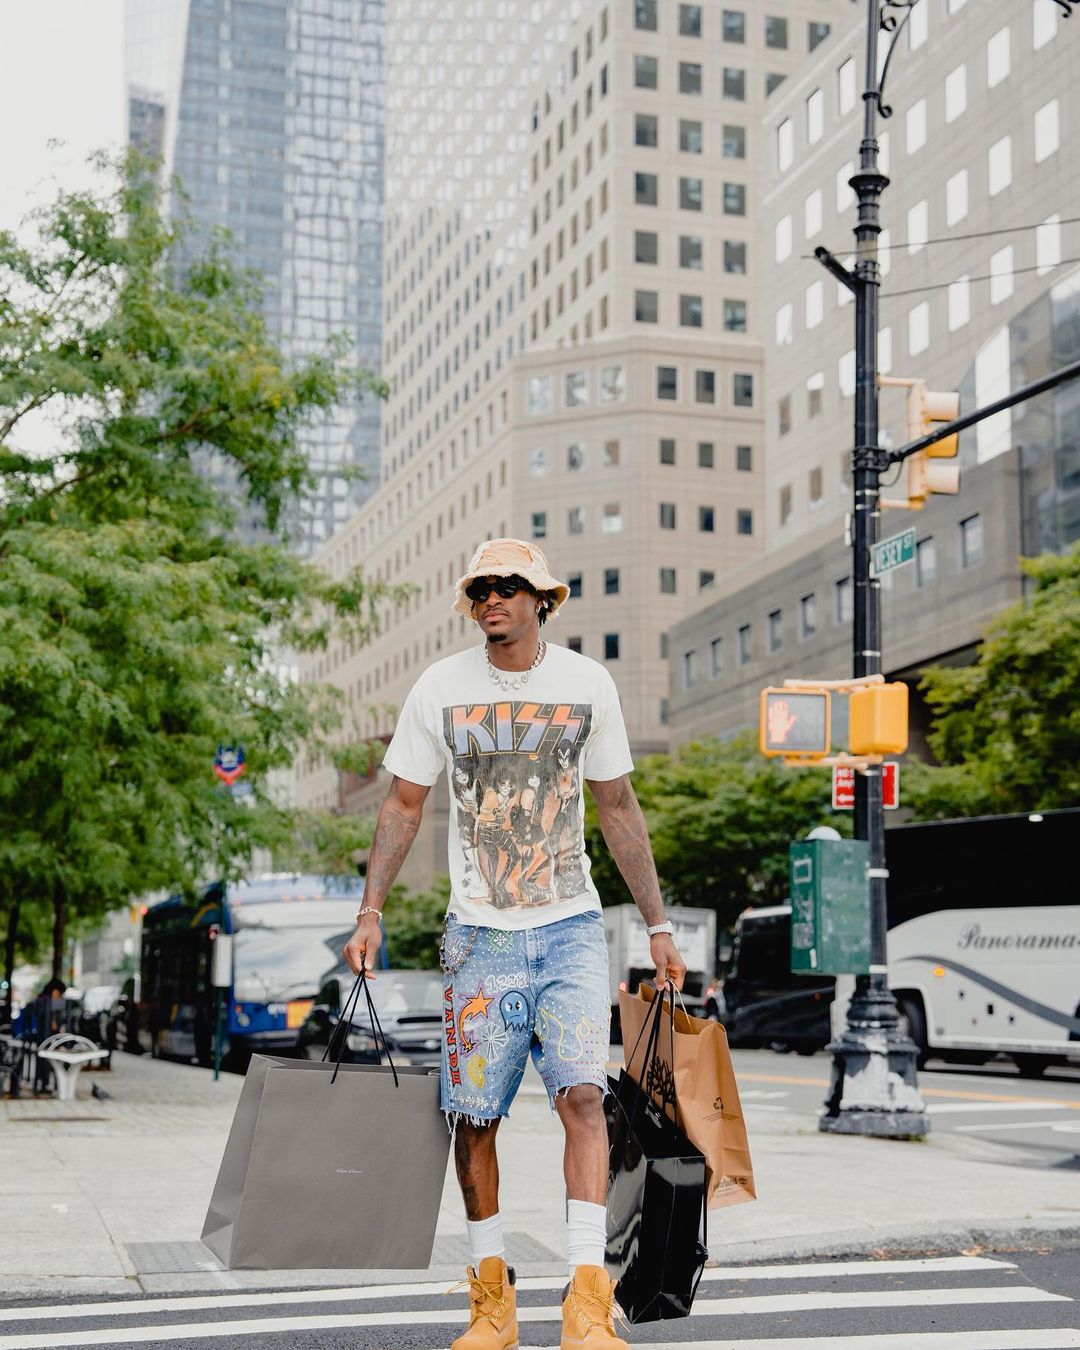 Jarred Vanderbilt attracts every attentions on LA street with eye-catching outfit